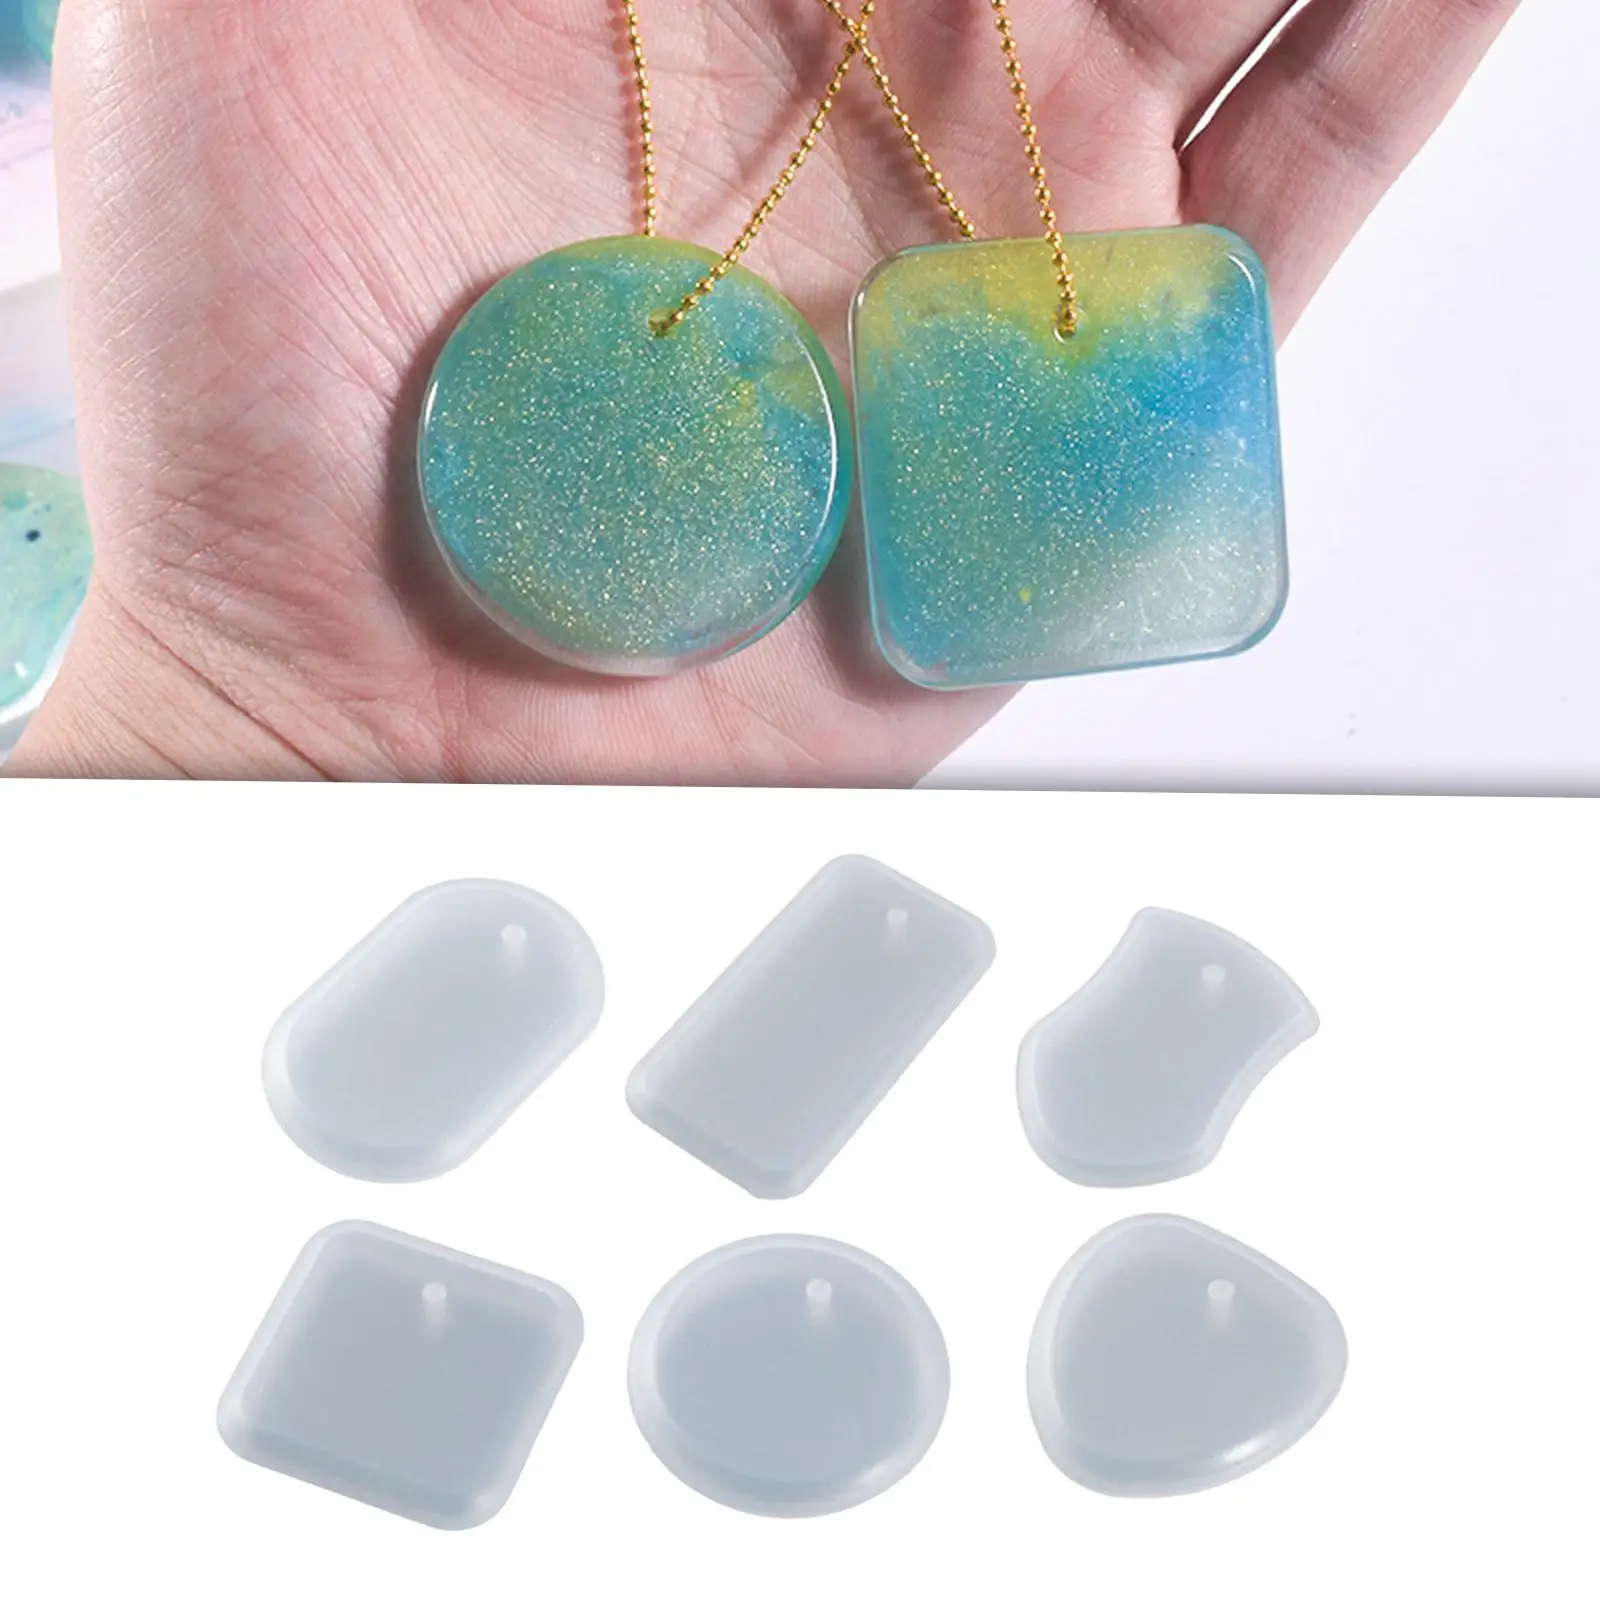 Pendant Molds Resin Casting Jewelry Making Mold for Earrings